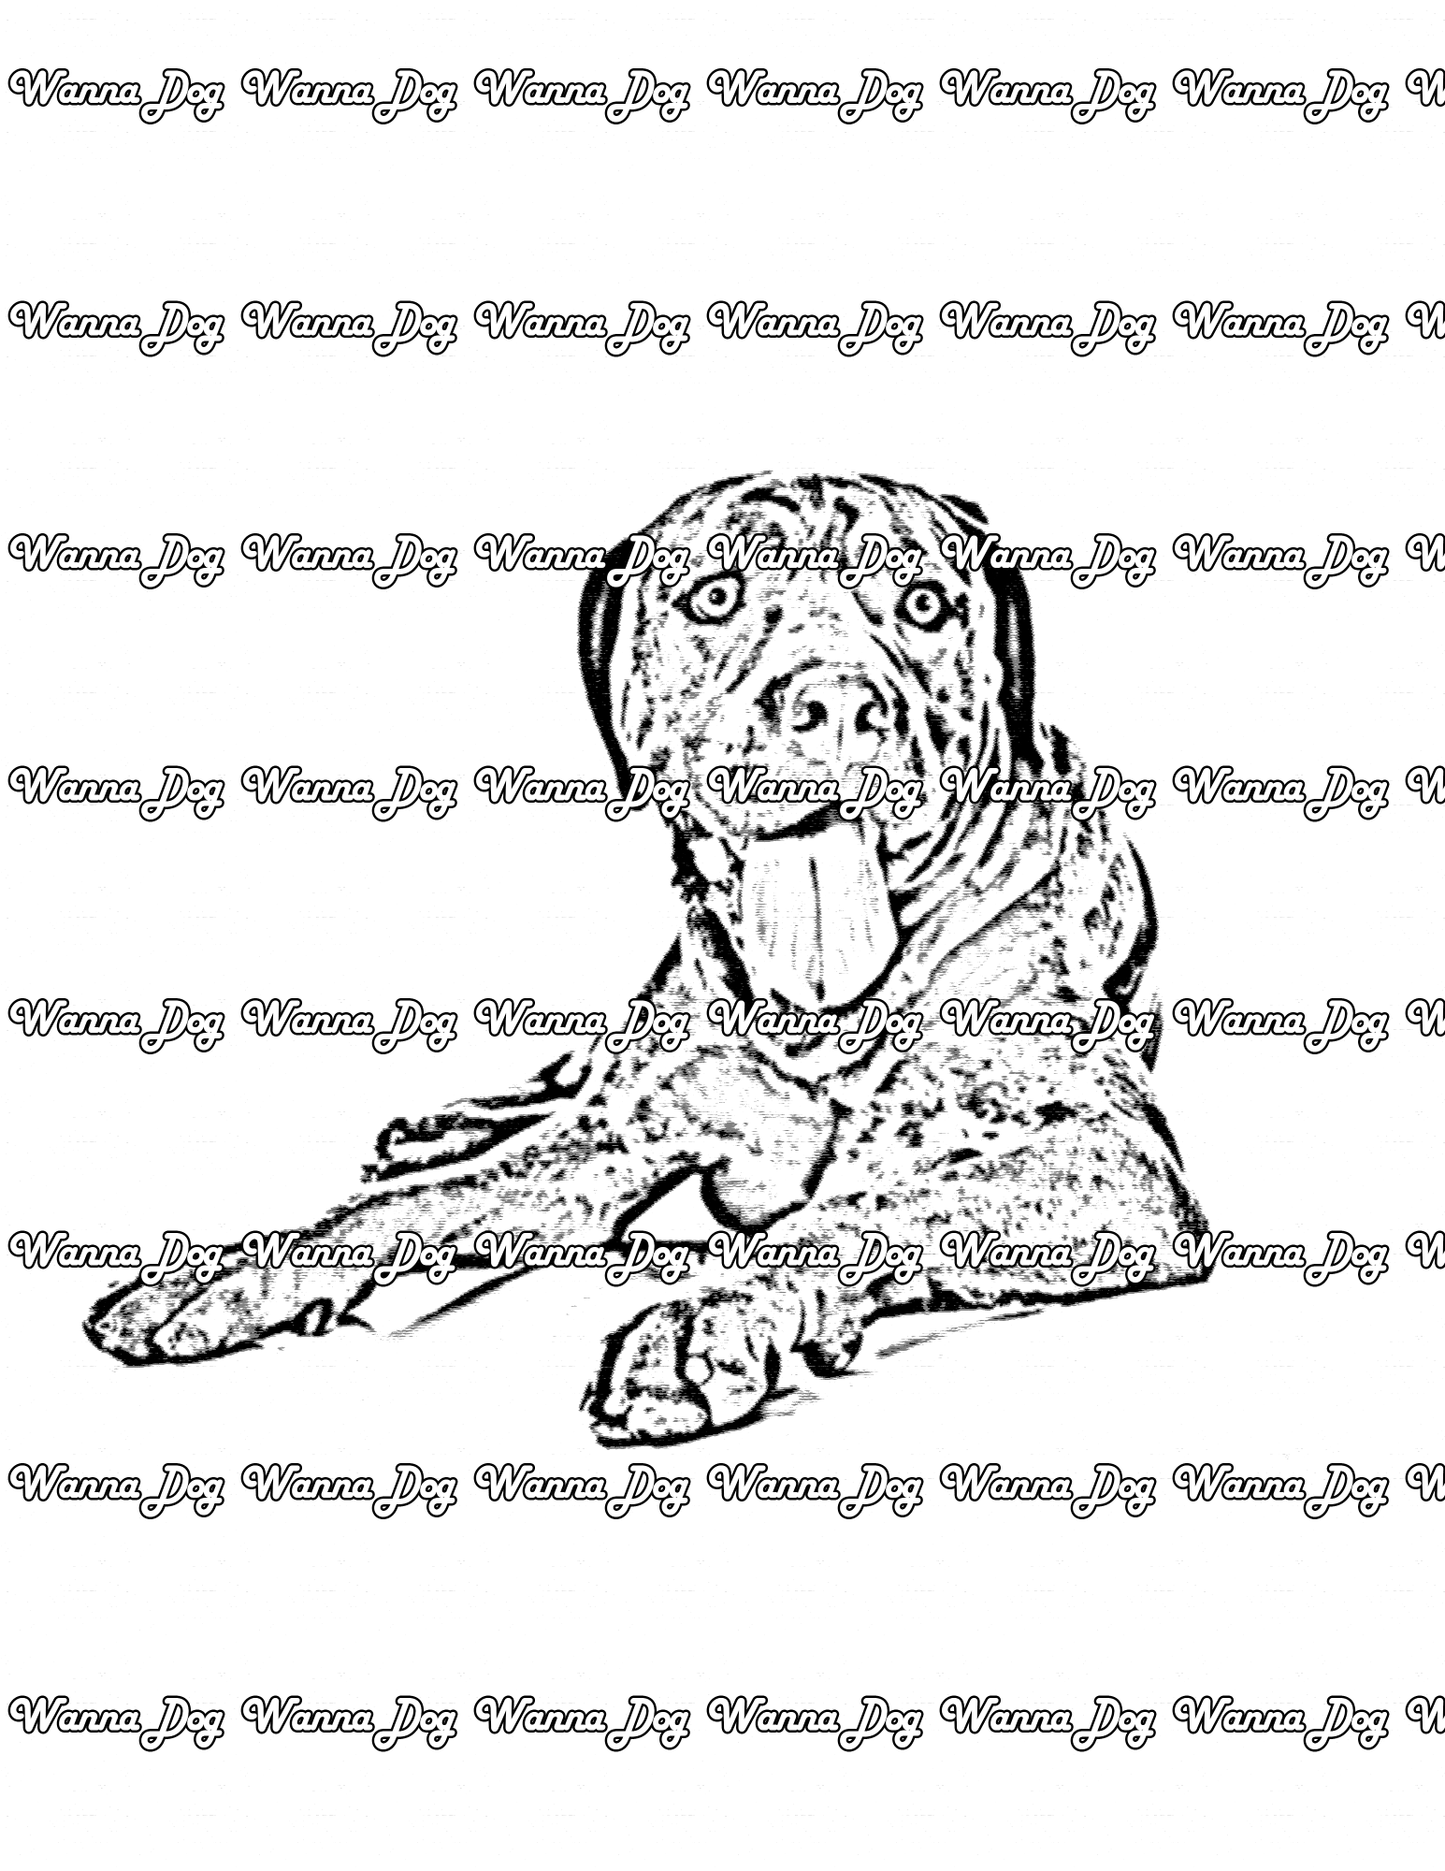 Mastiff Coloring Page of a Mastiff sitting down with their tongue out